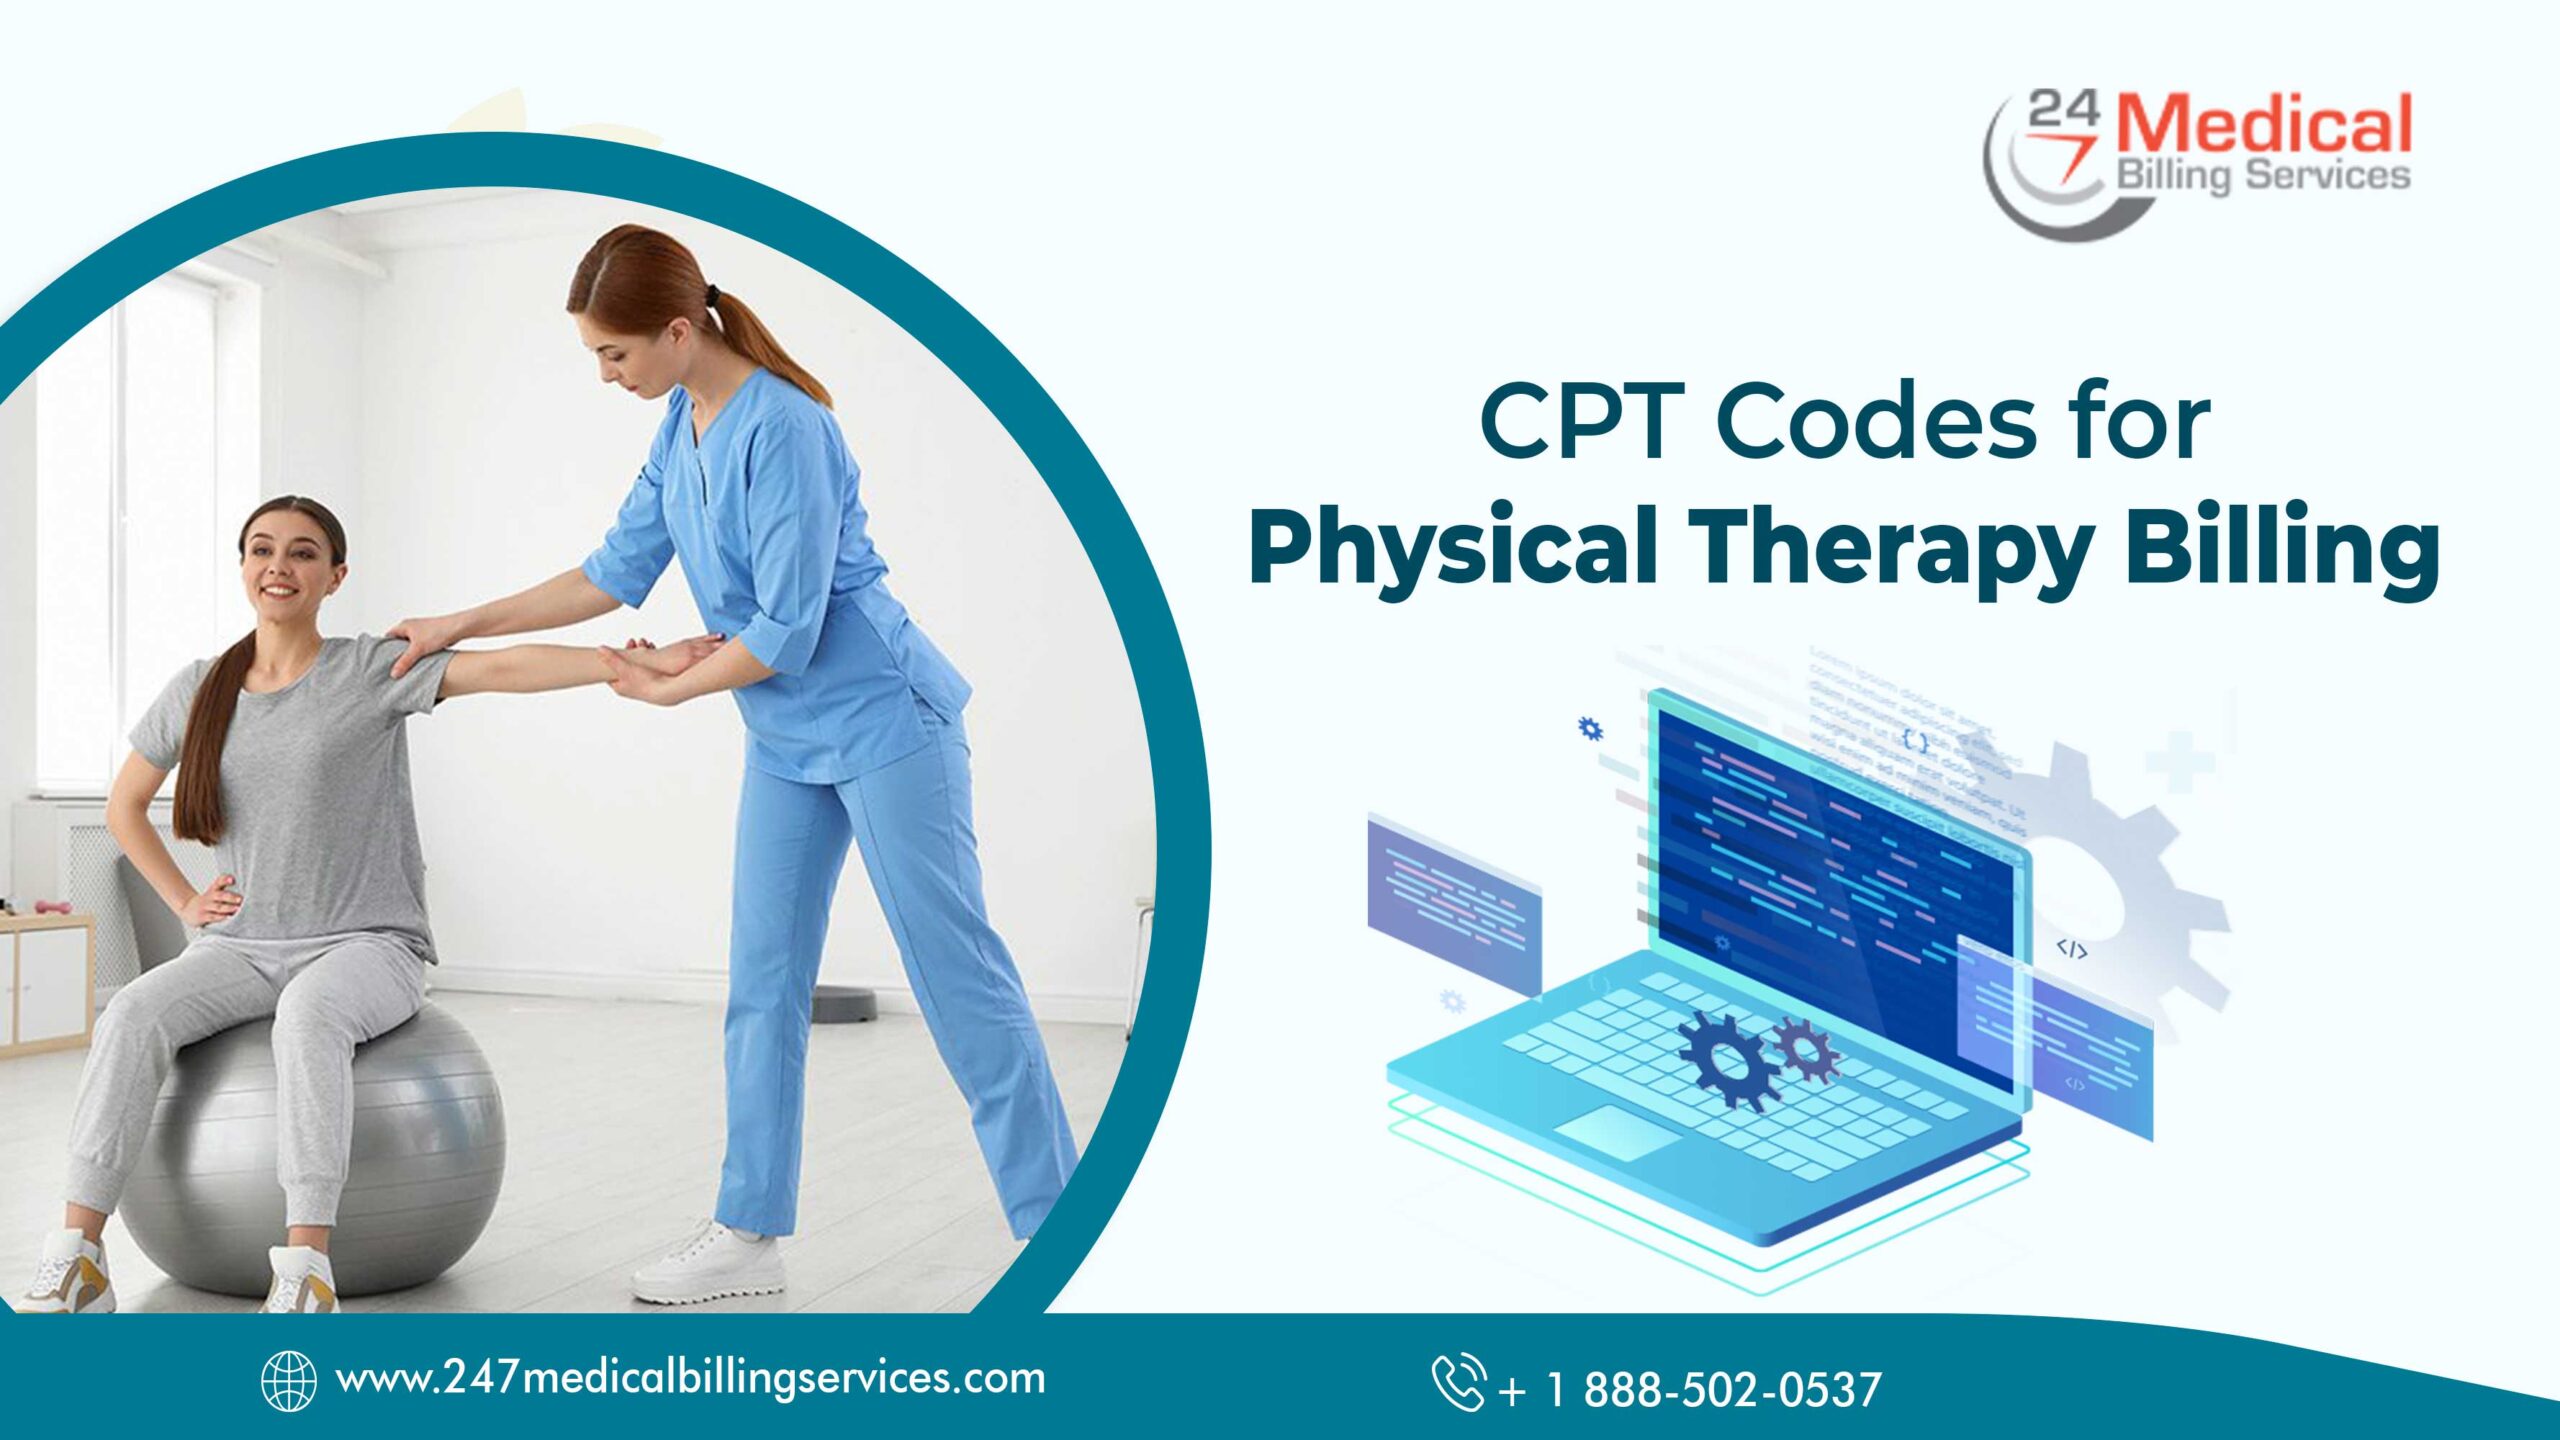  CPT Codes for Physical Therapy Billing